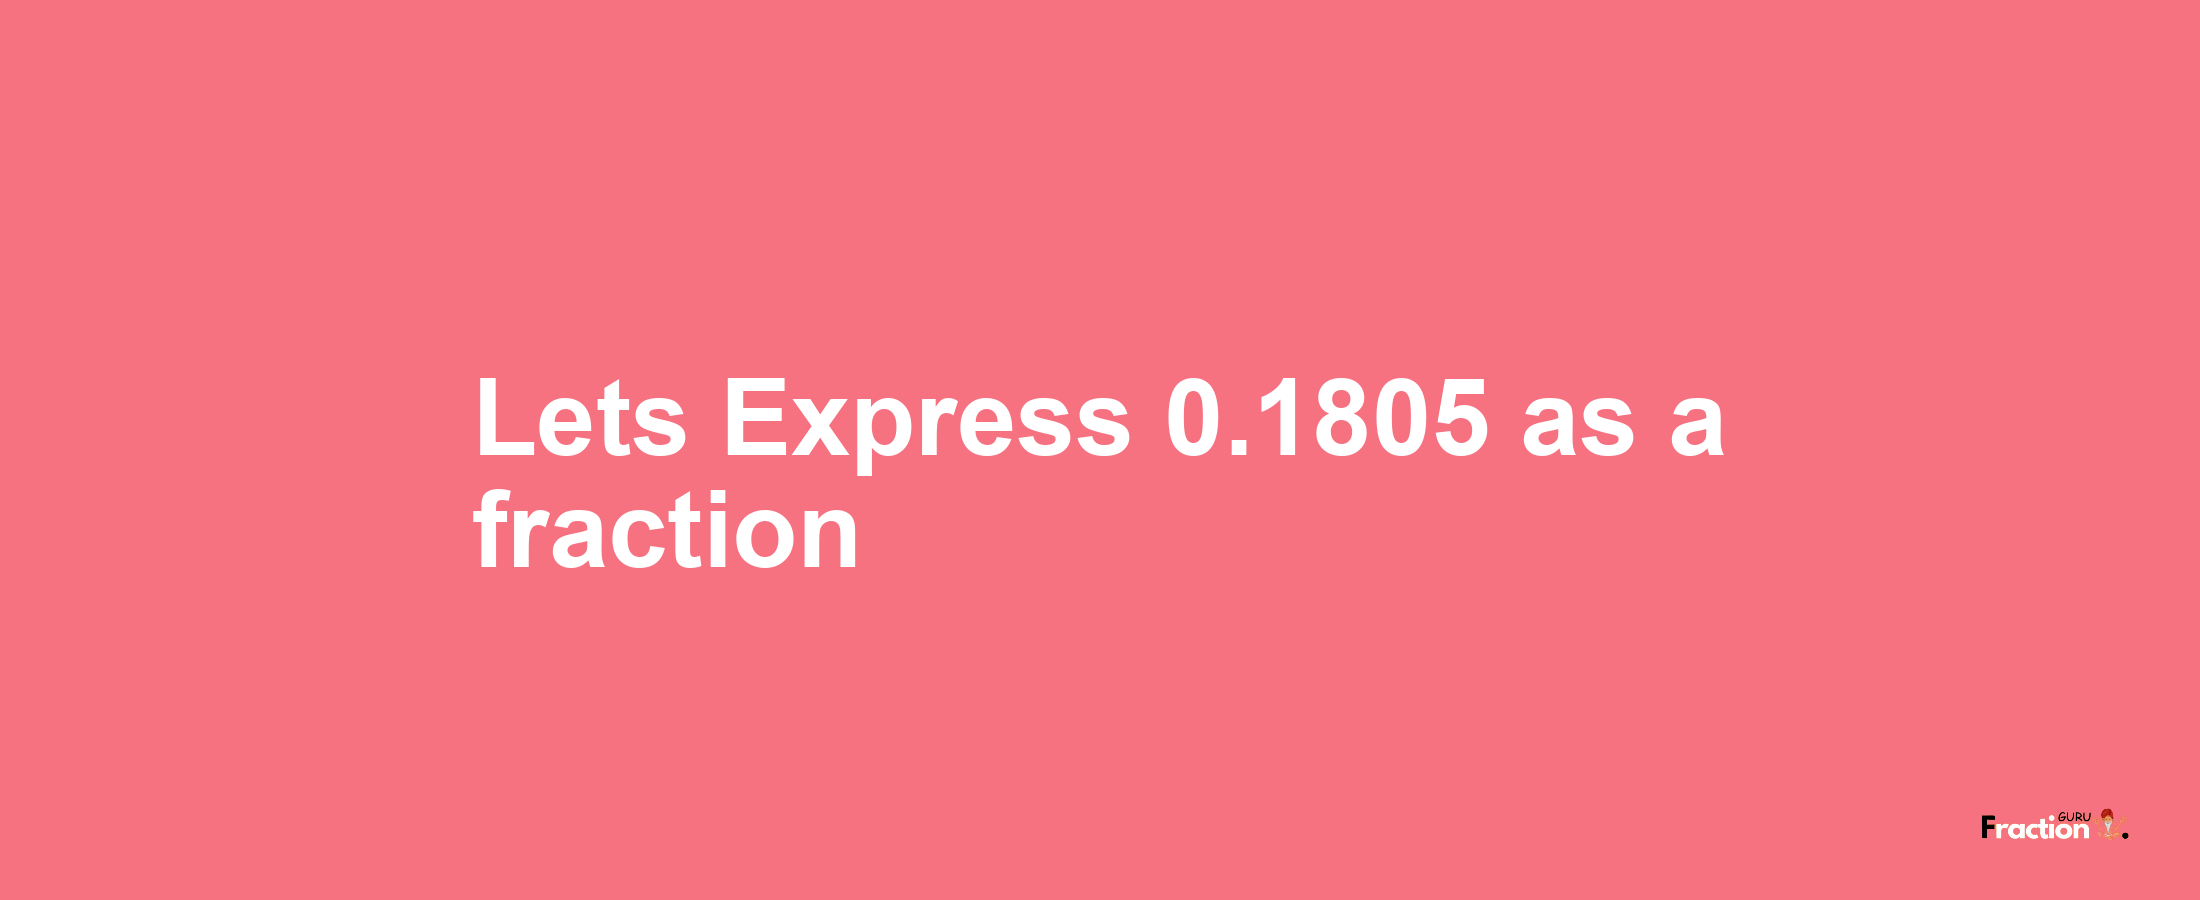 Lets Express 0.1805 as afraction